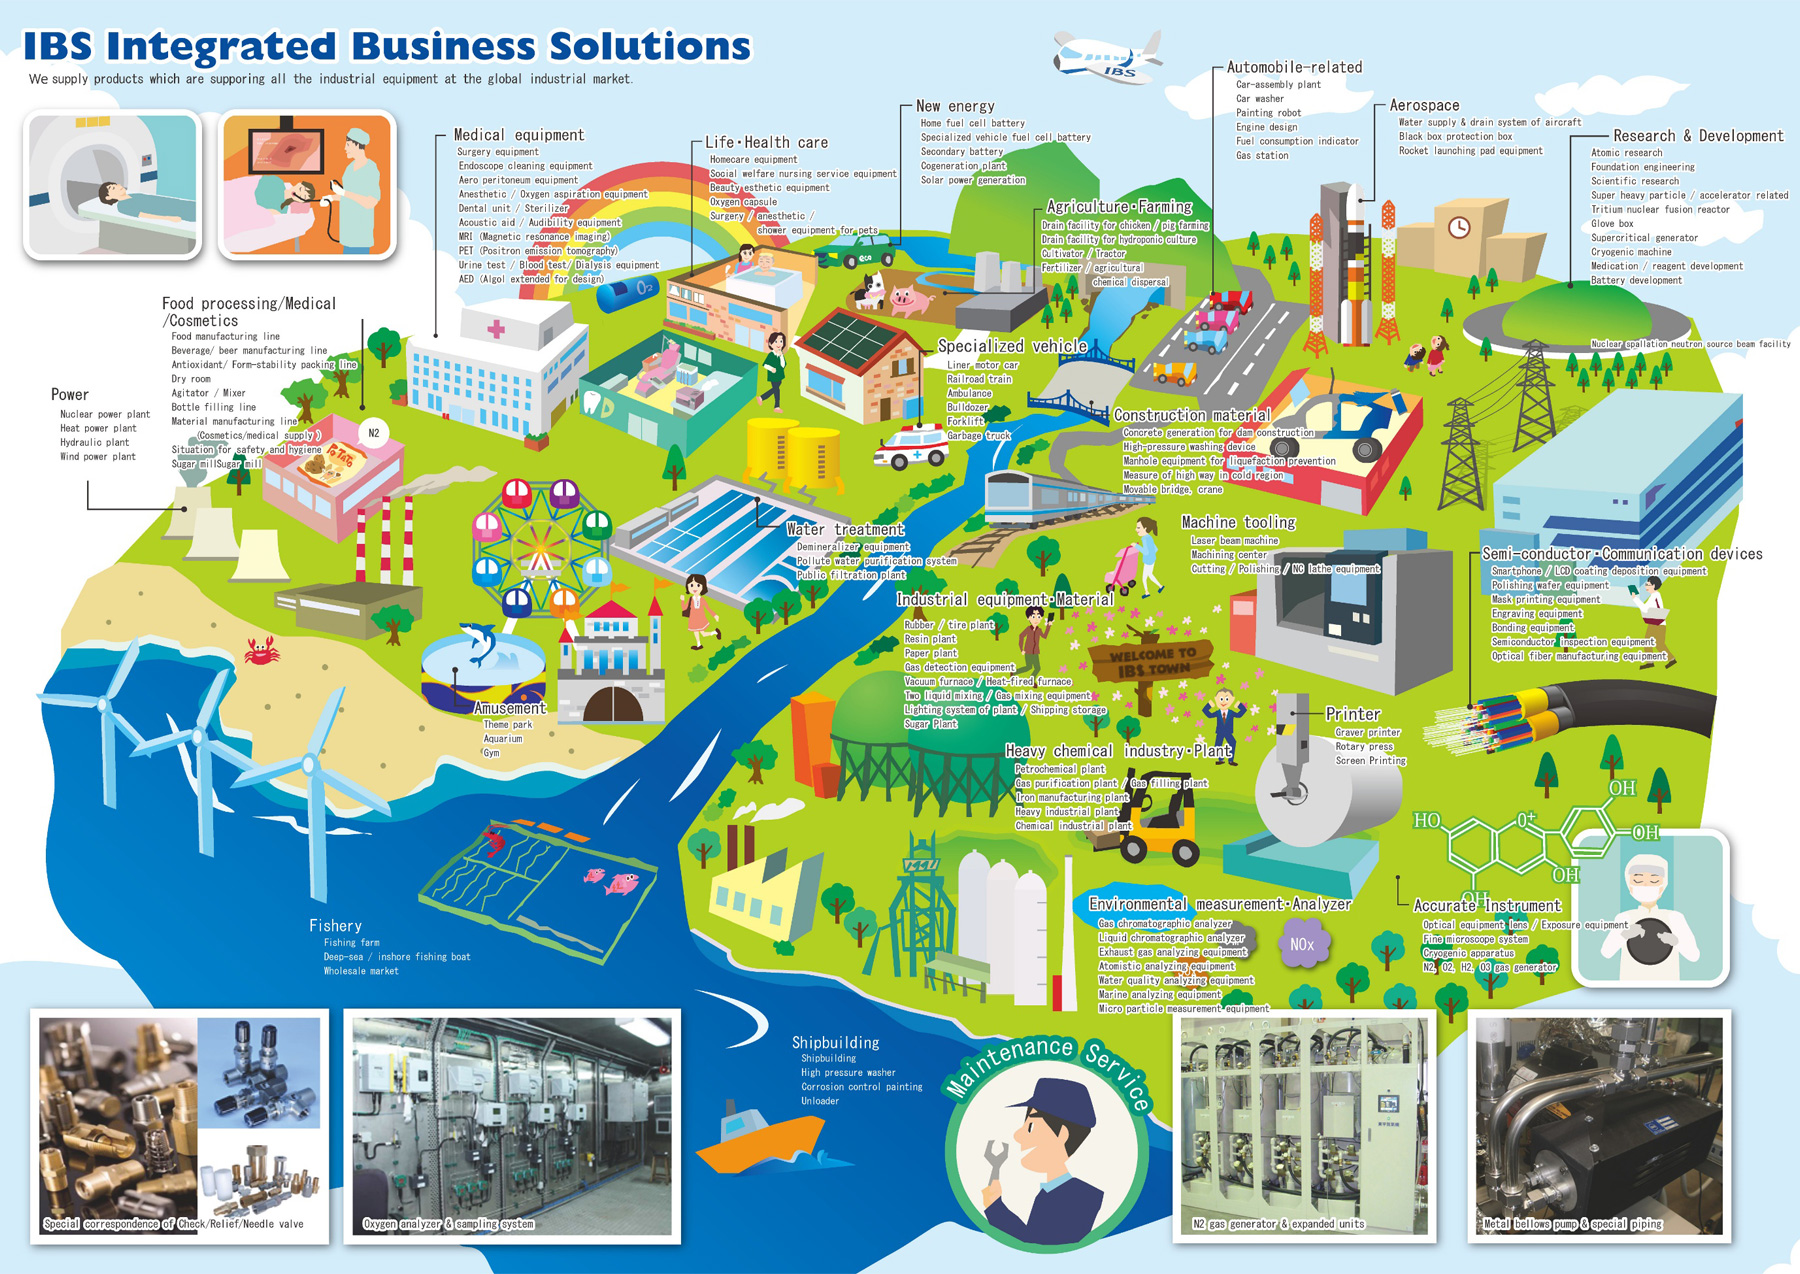 IBS Integrated Business Solutionsの説明画像